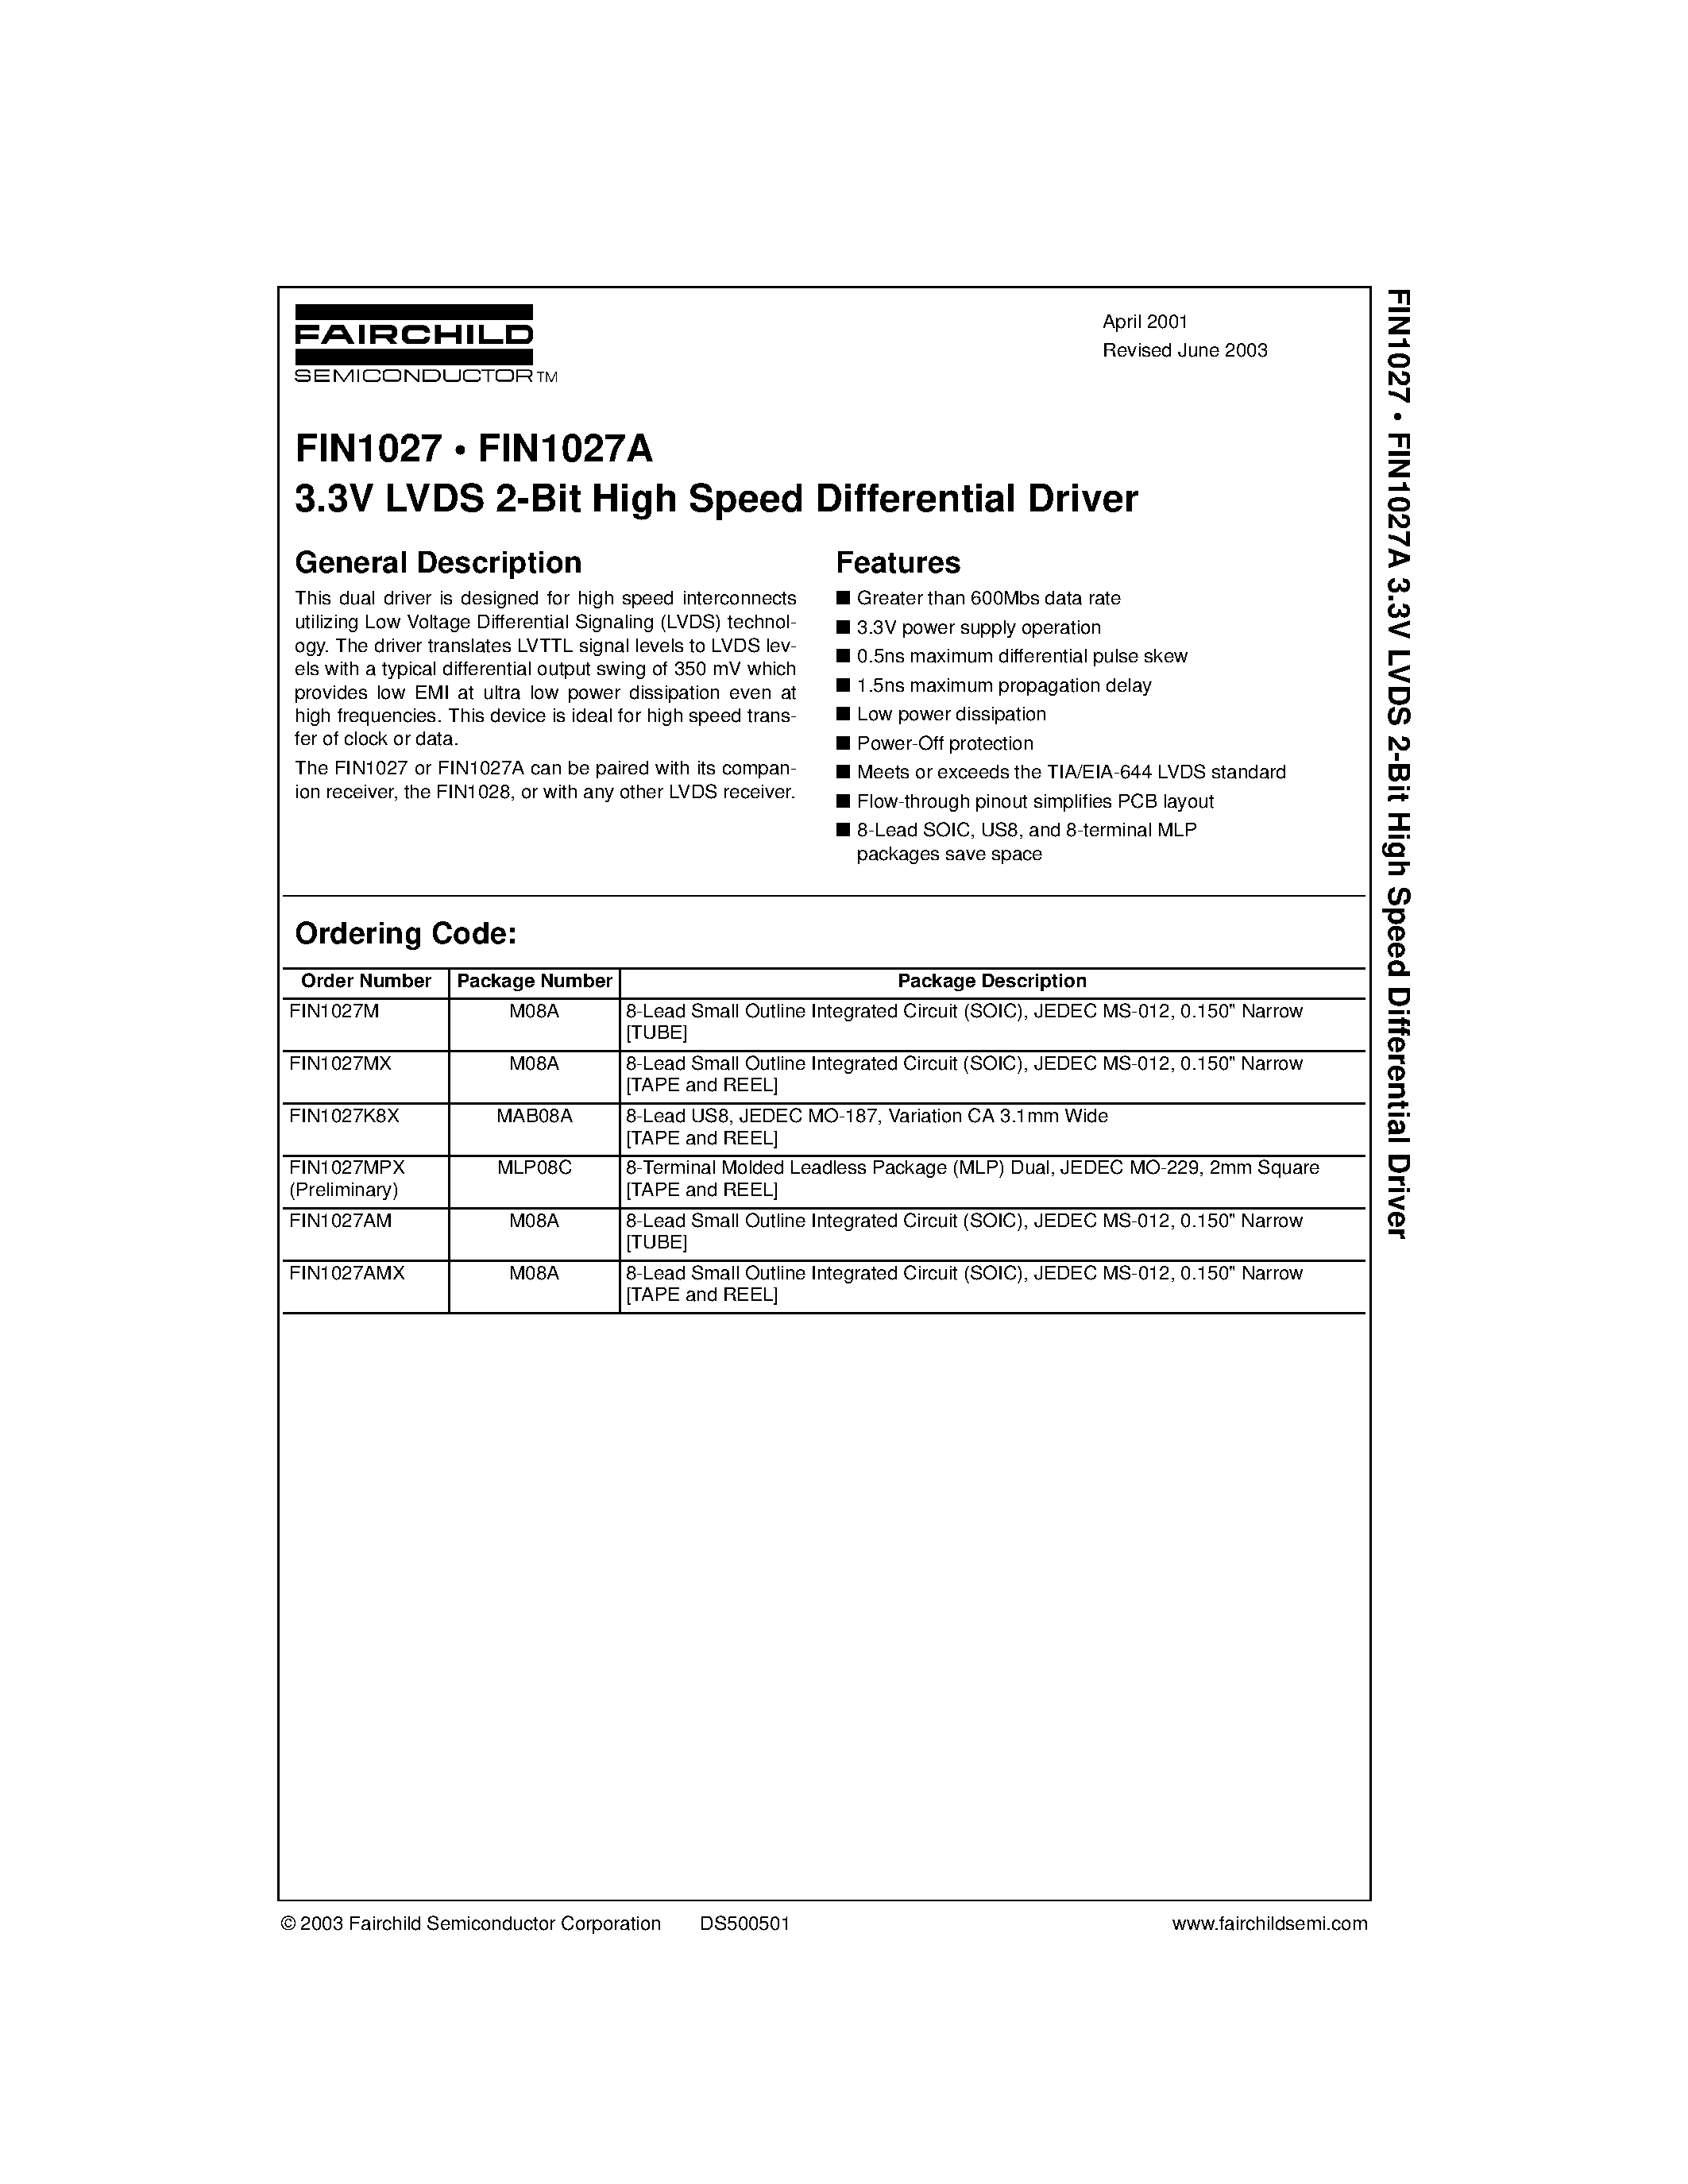 Datasheet FIN1027MX - 3.3V LVDS 2-Bit High Speed Differential Driver page 1